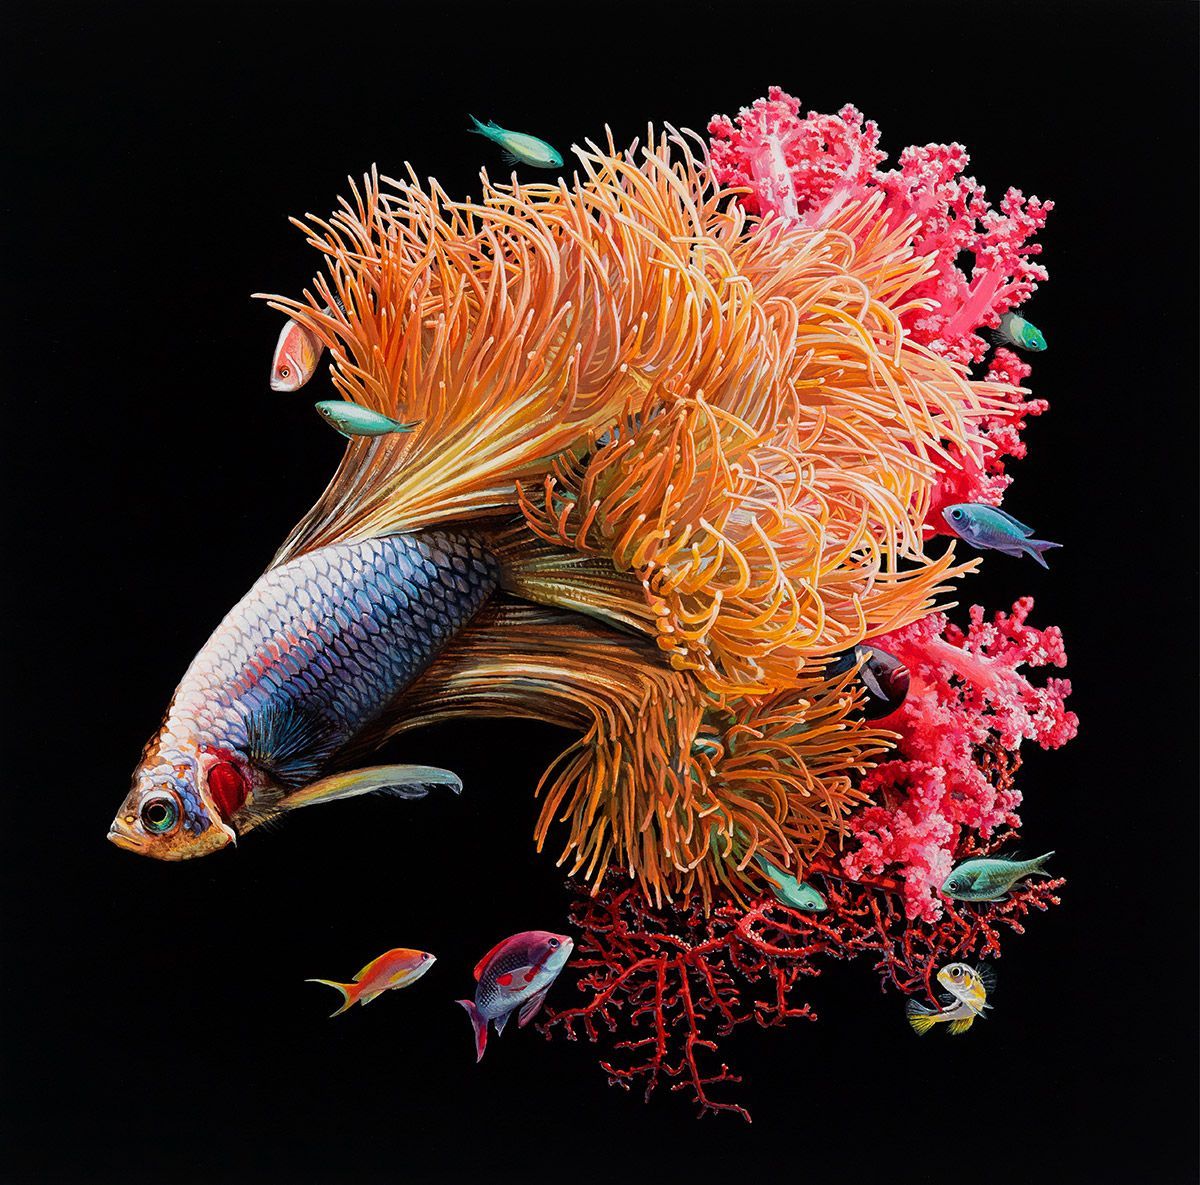 Hyper Realistic Fish Paintings By Lisa Ericson. Inspiration Grid